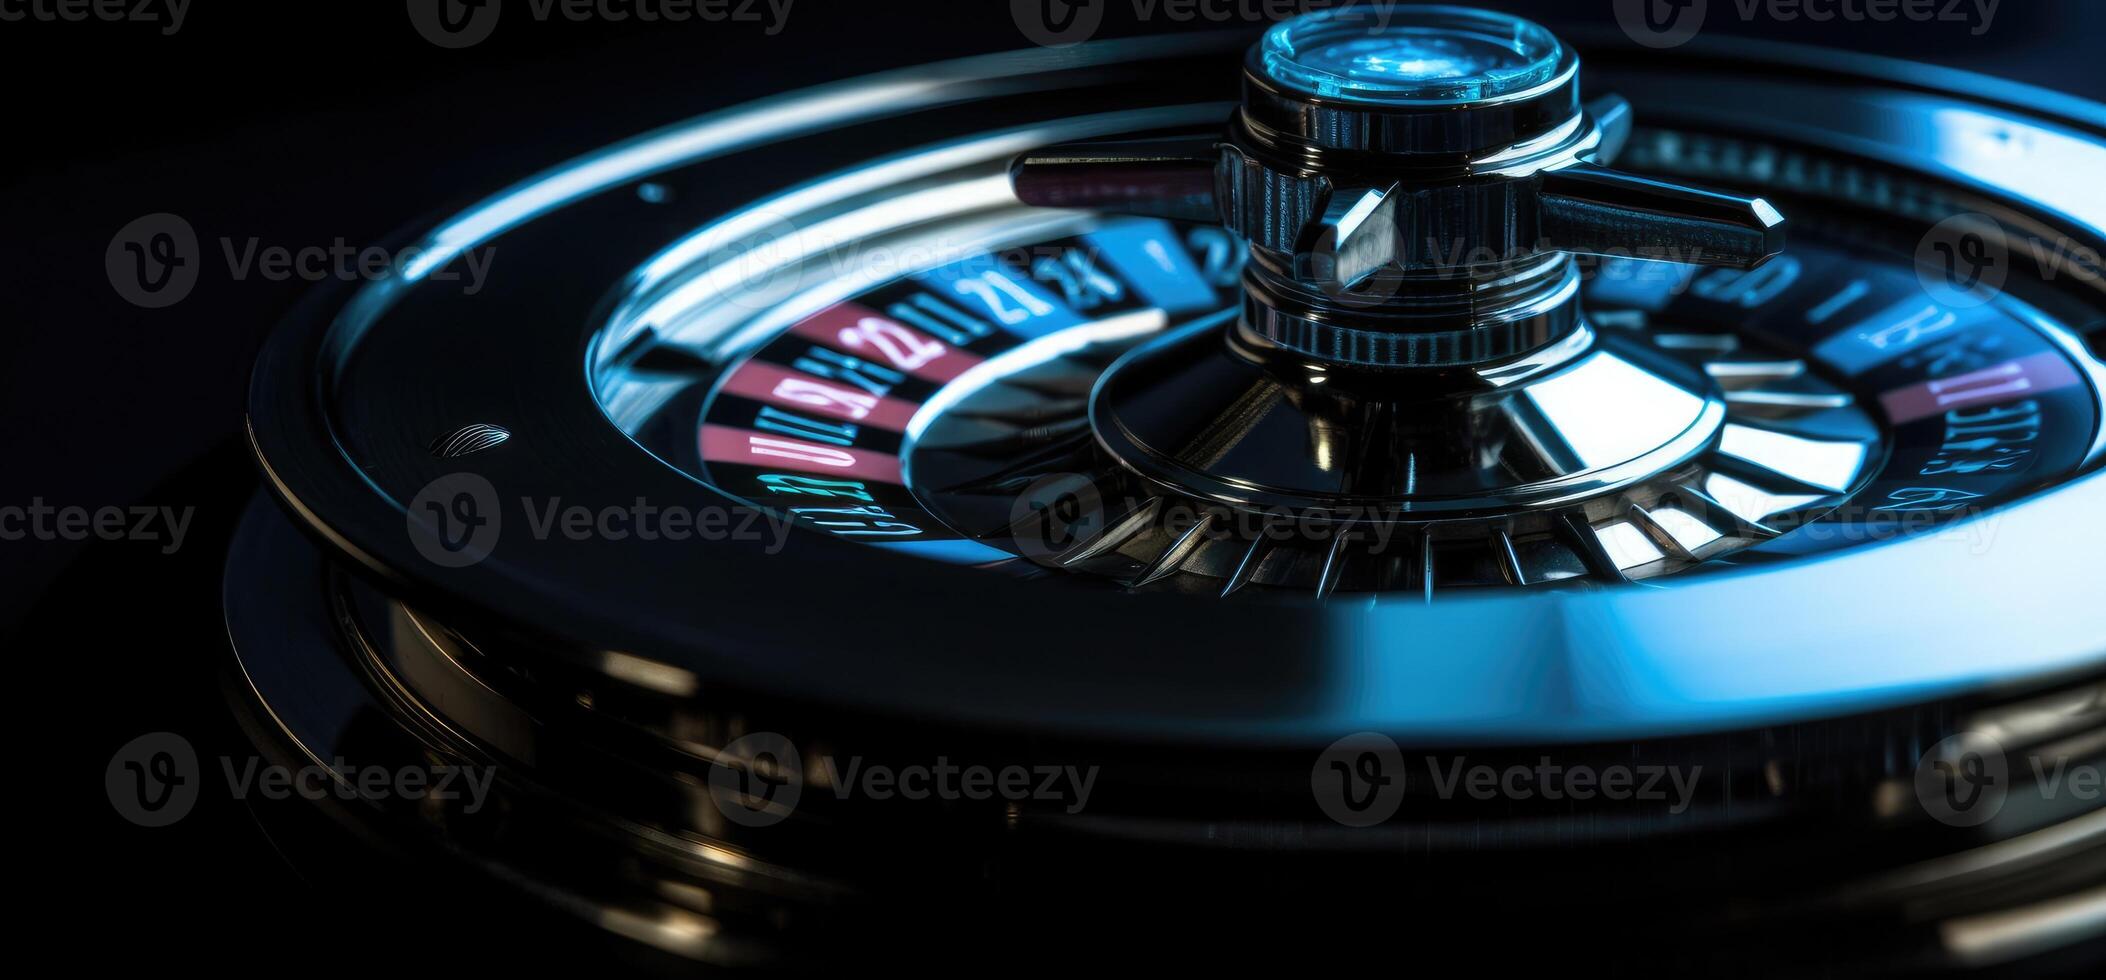 Roulette wheel with blue background and lights, casino photo. photo